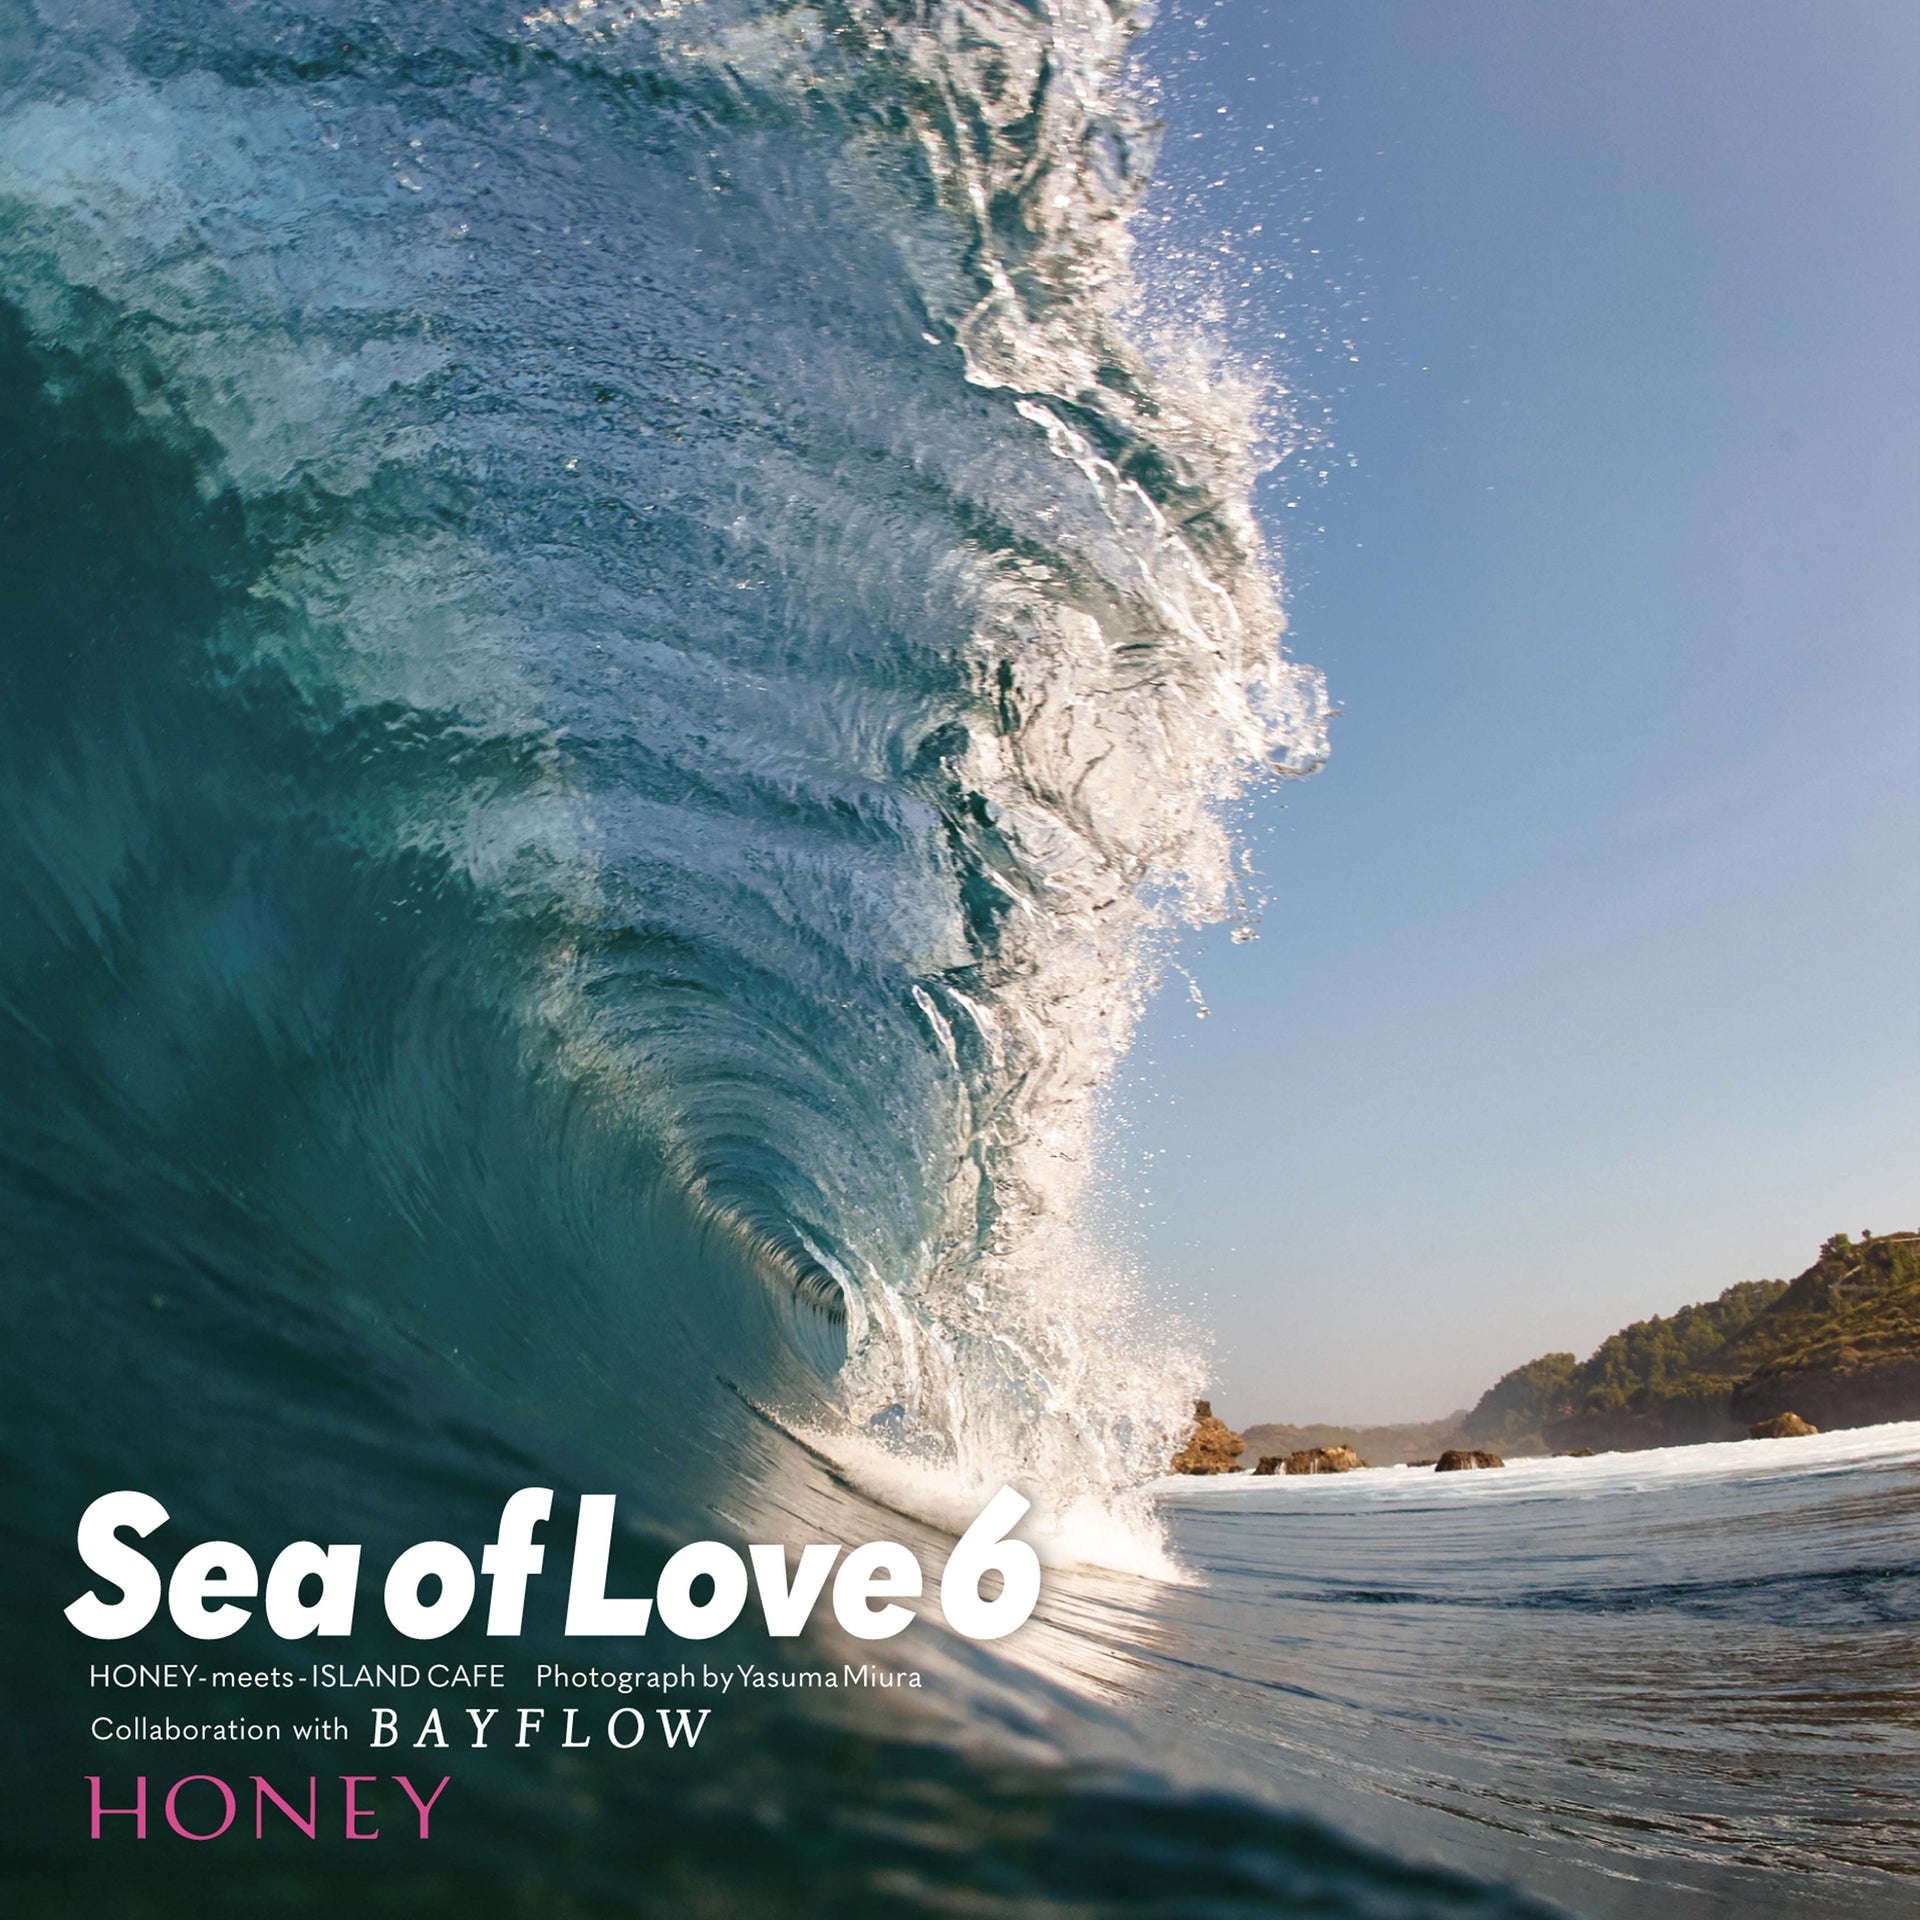 HONEY meets ISLAND CAFE - Sea of Love 6 – Collaboration with BAYFLOW　